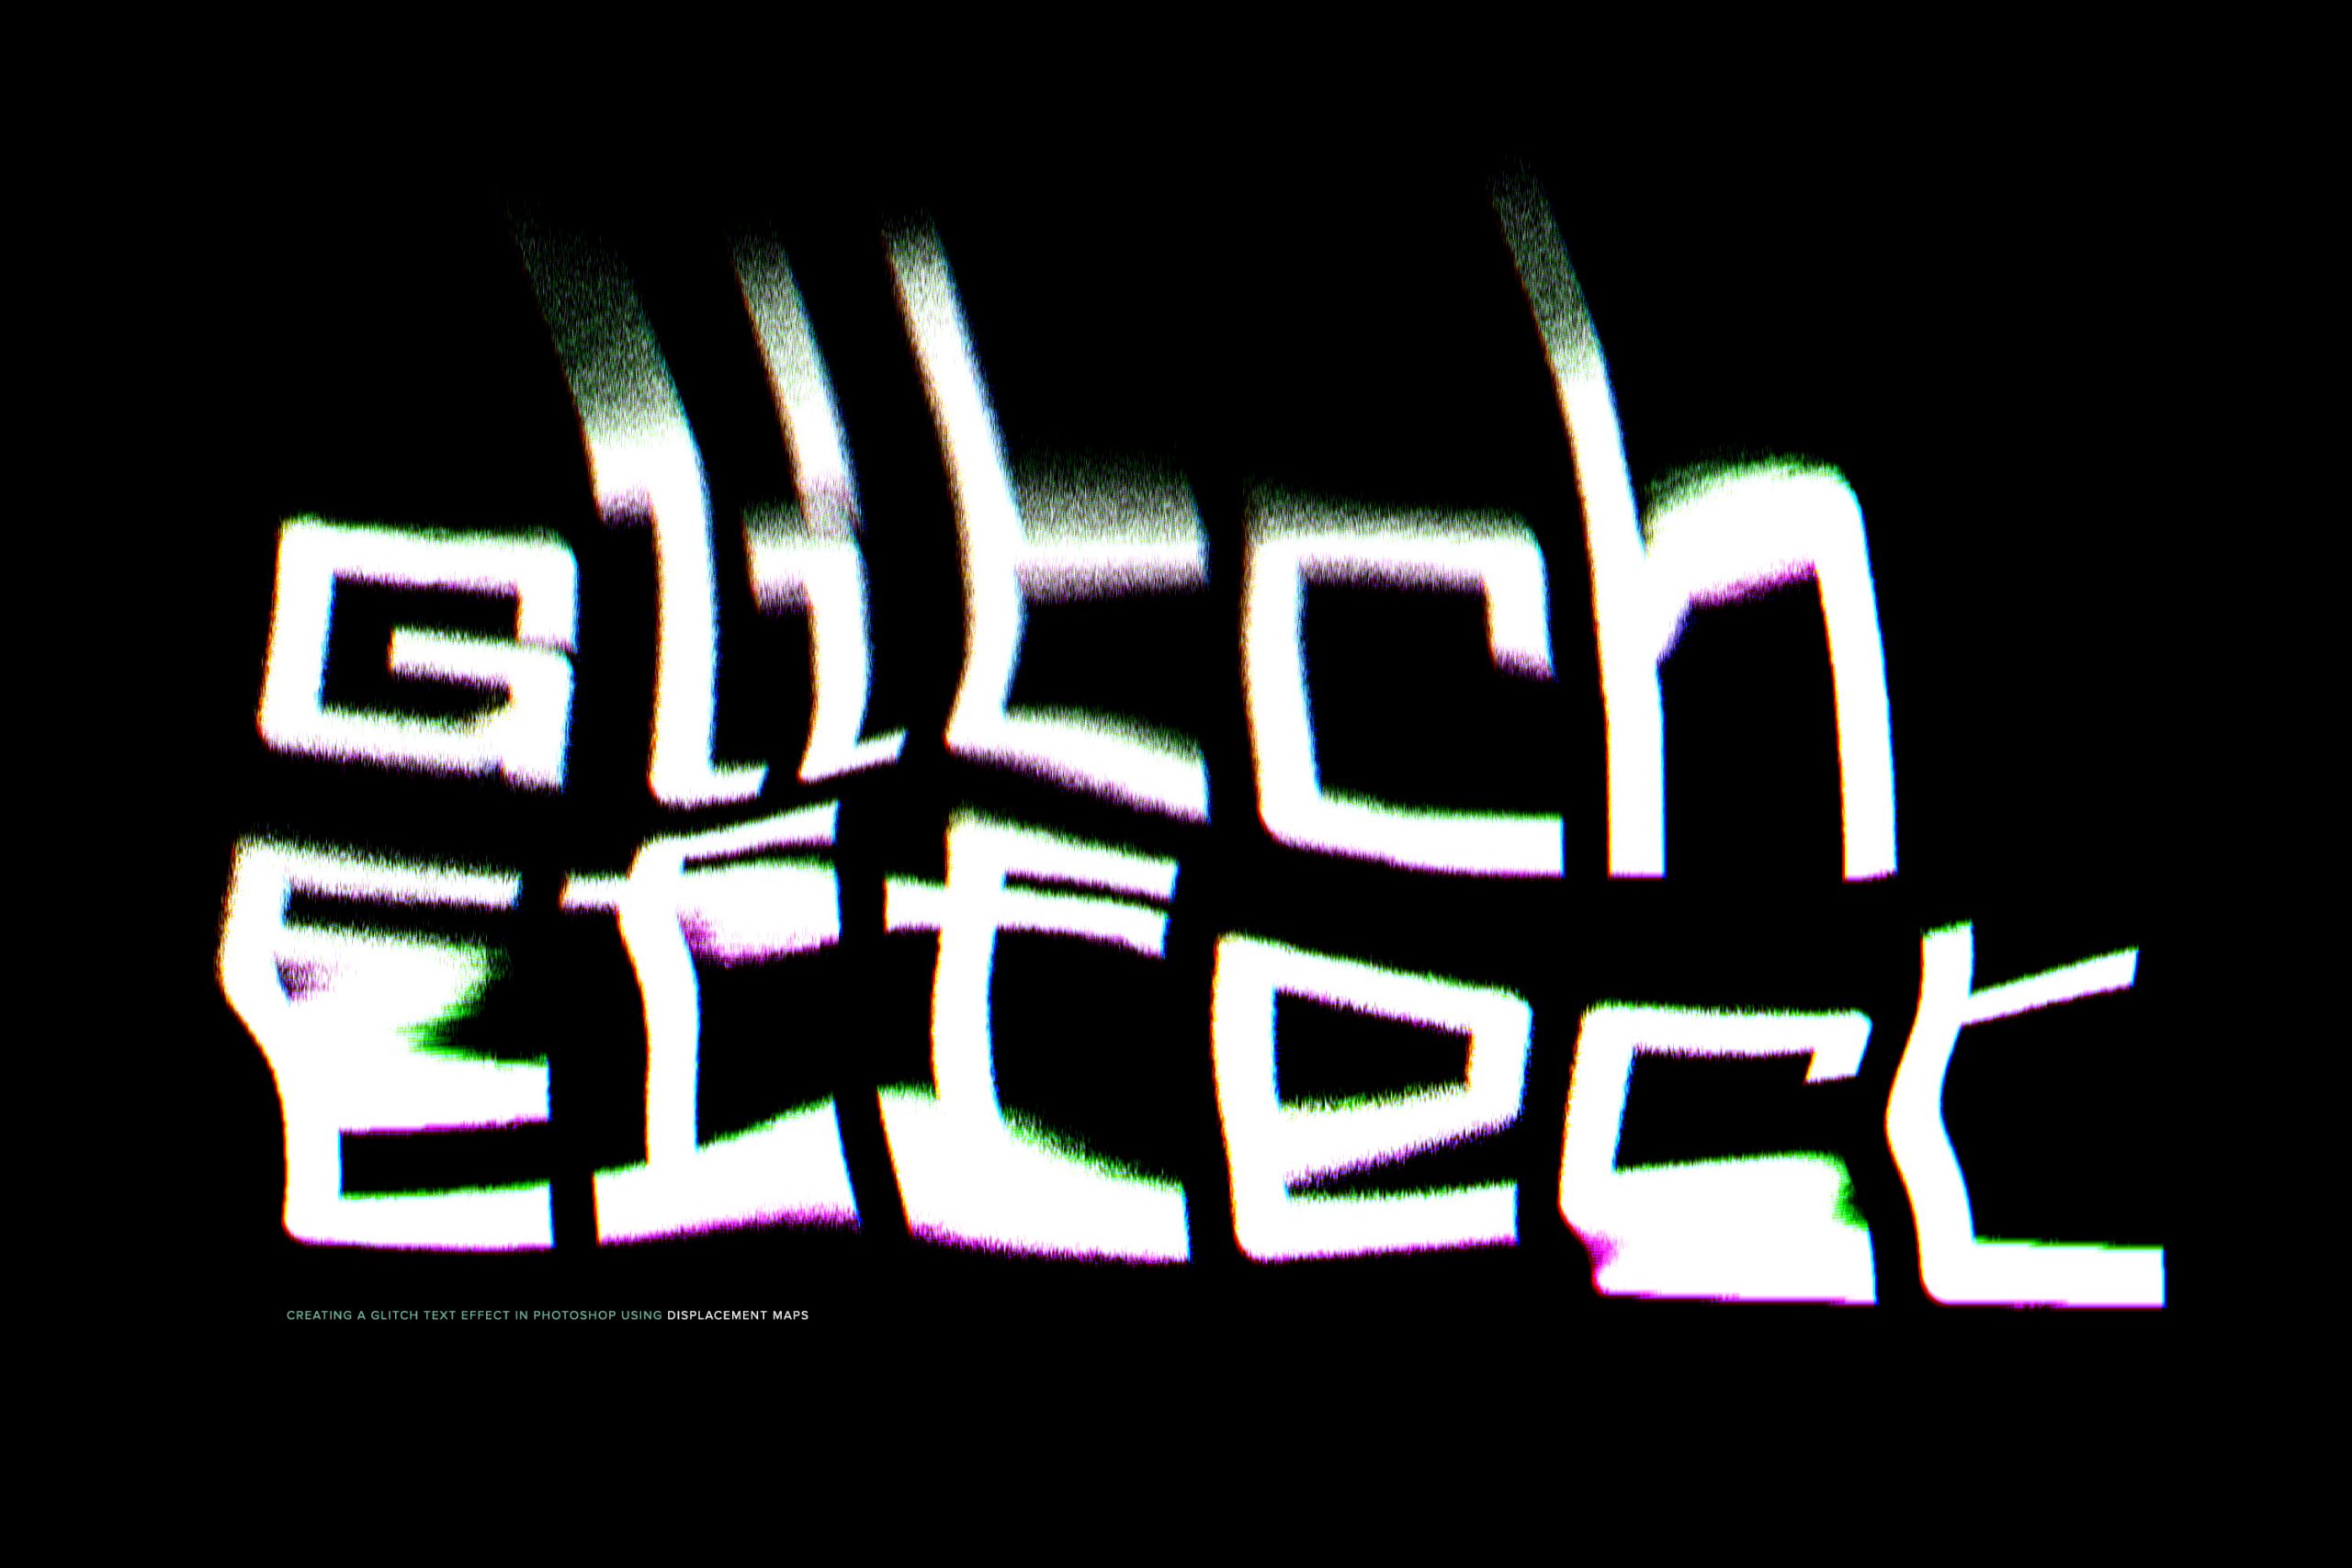 Creating a Glitch Text Effect in Photoshop